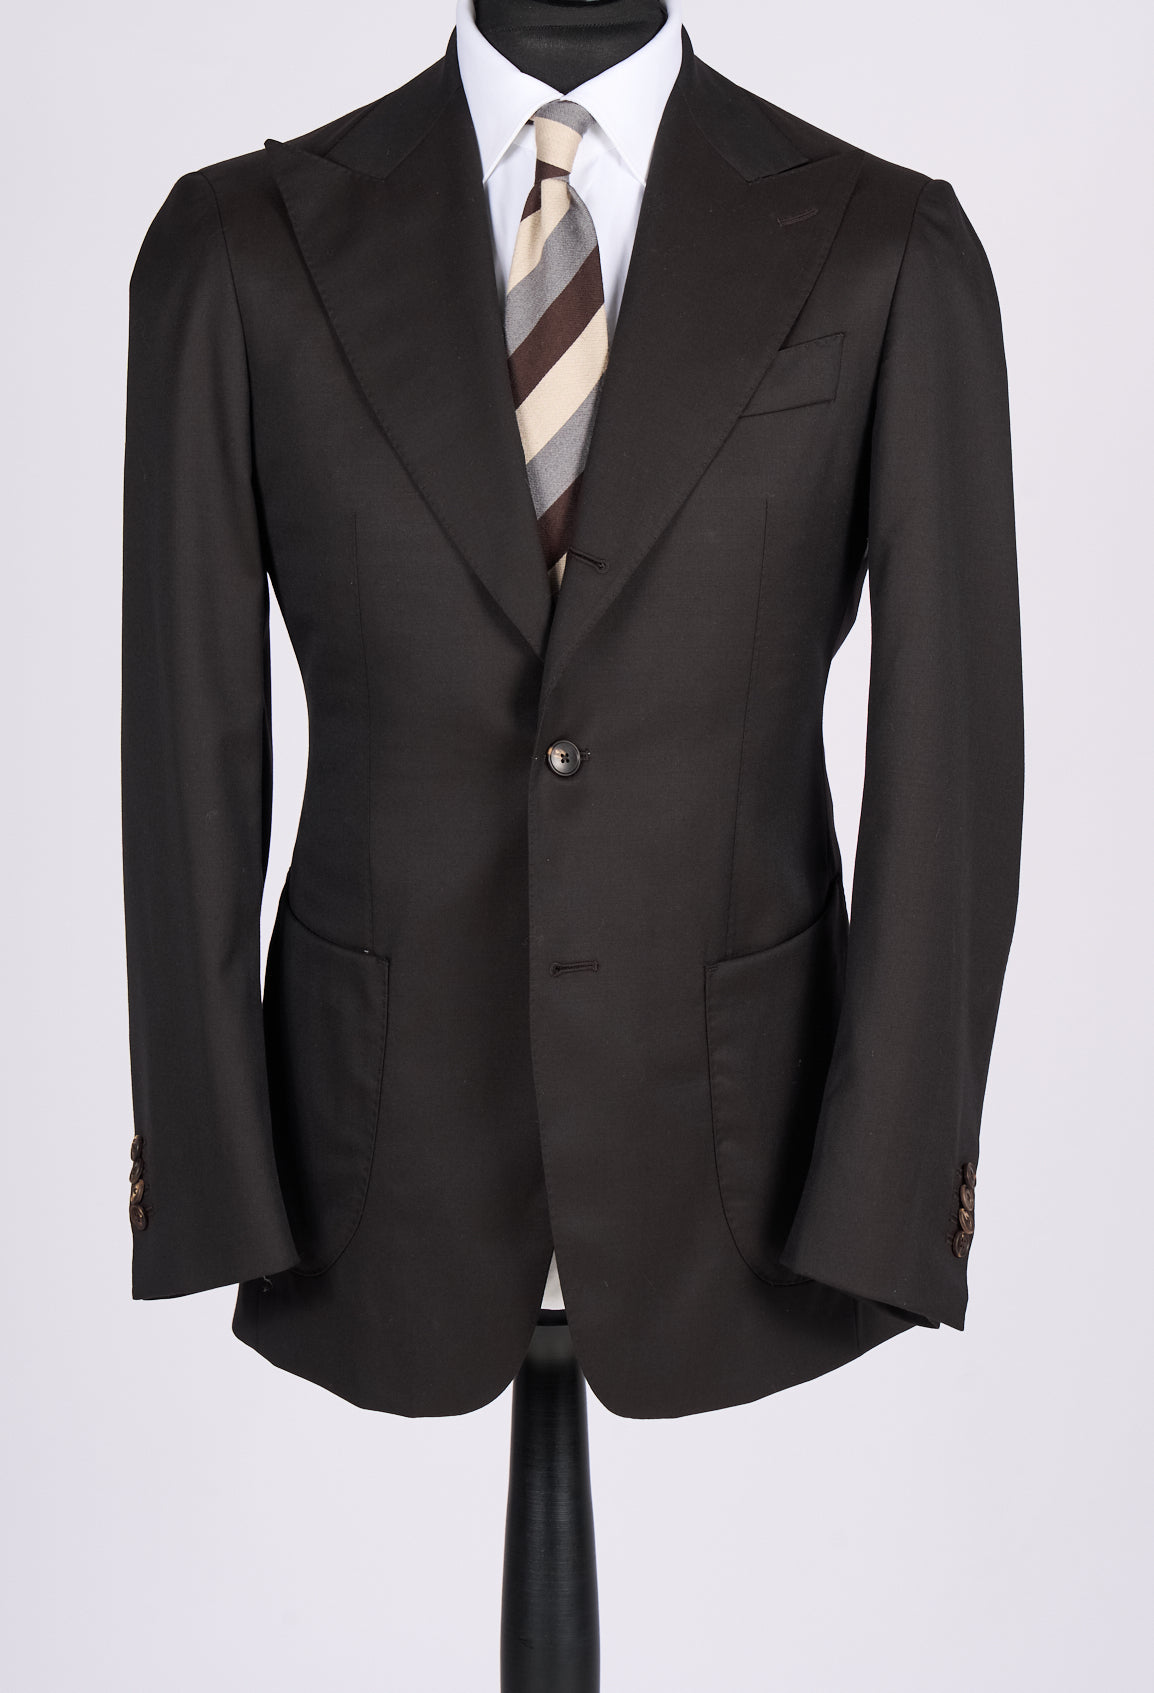 New SUITREVIEW Elmhurst Midnight Brown Pure Wool Super 100s Wide Peak Suit - Size 38R and 42R